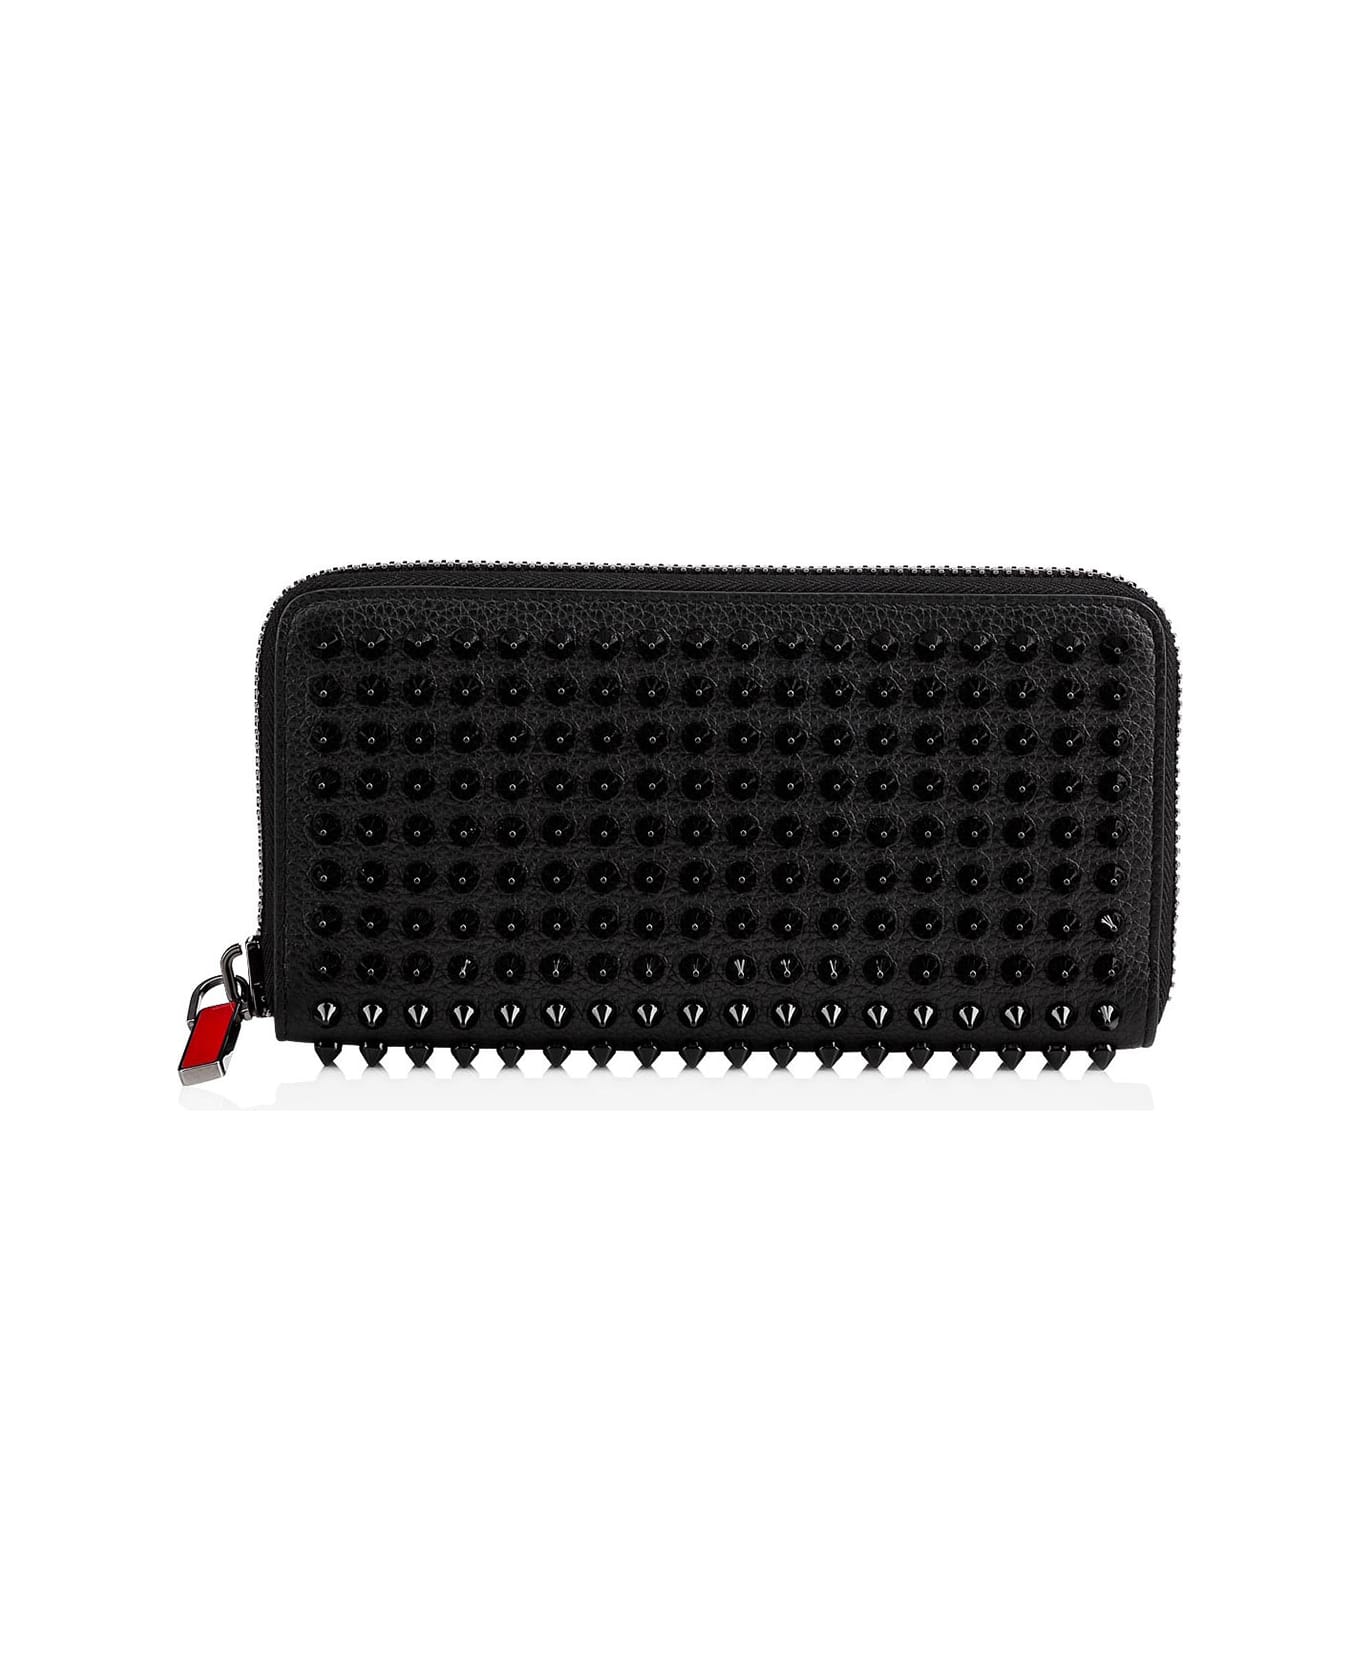 Christian Louboutin Leather Panettone Wallet With Spikes - Black 財布